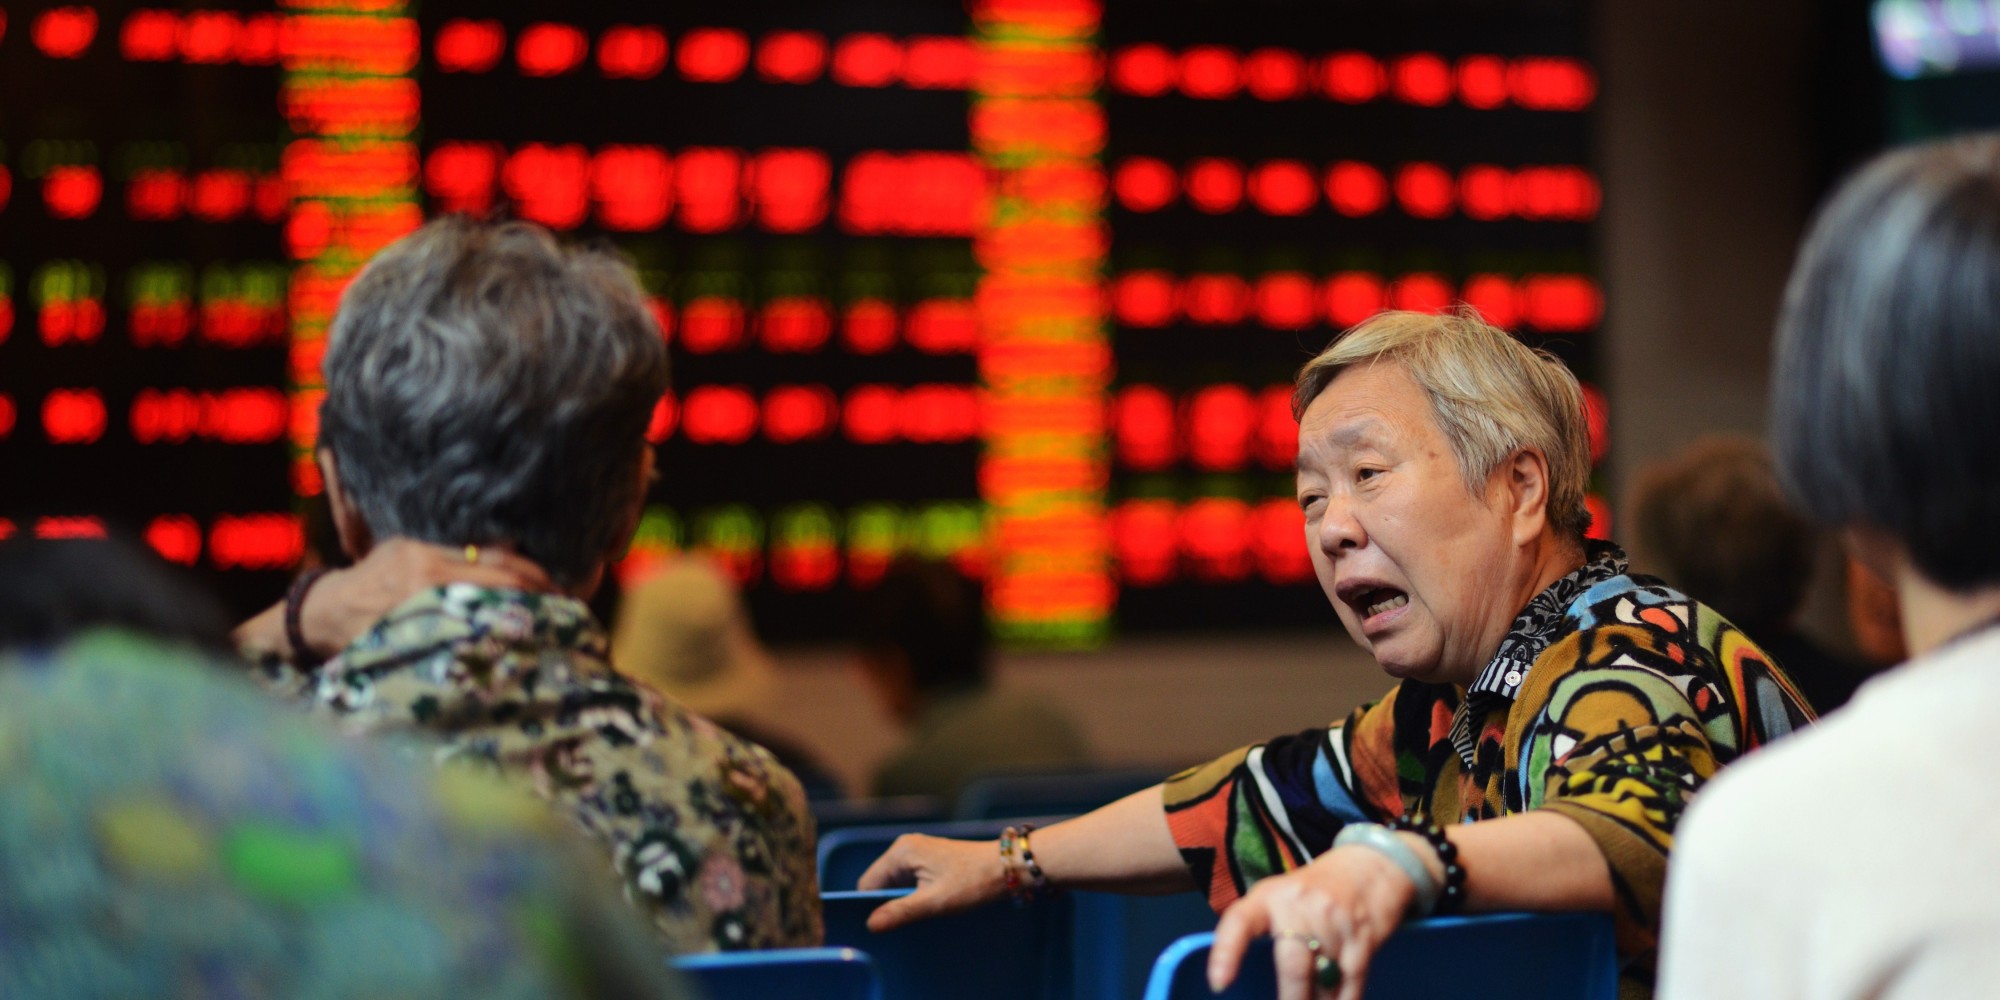 Shanghai's Stock Market is Collapsing. Do Chinese People Care? | HuffPost